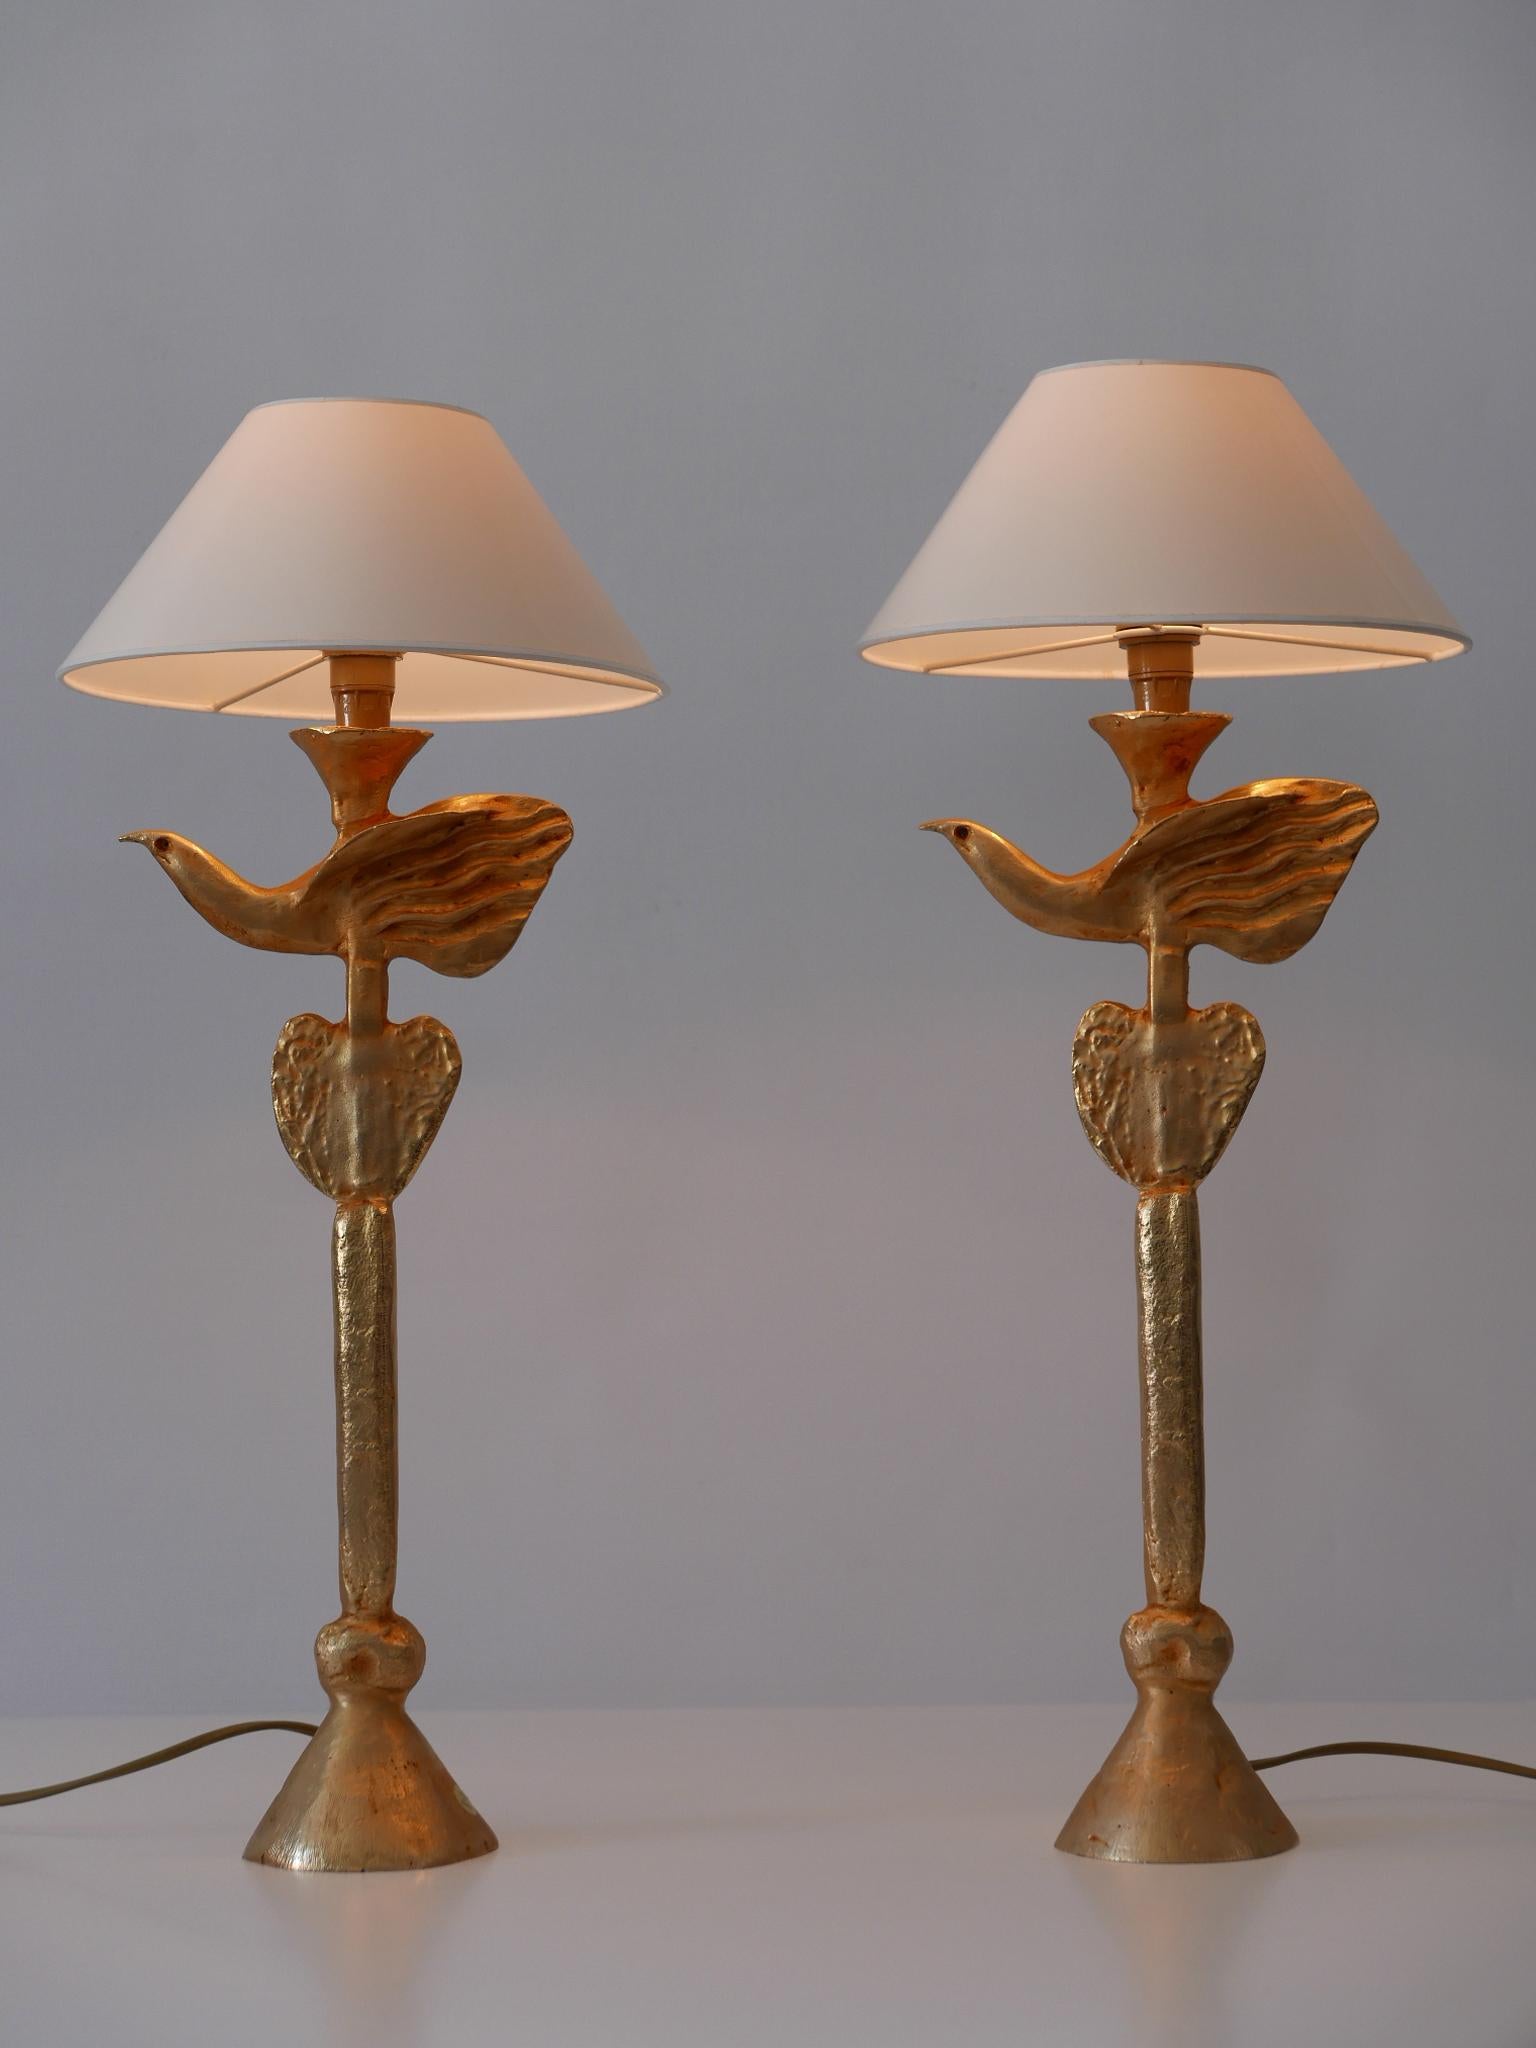 Set of Two Gilt Bronze Dove Table Lamps by Pierre Casenove for Fondica France 1